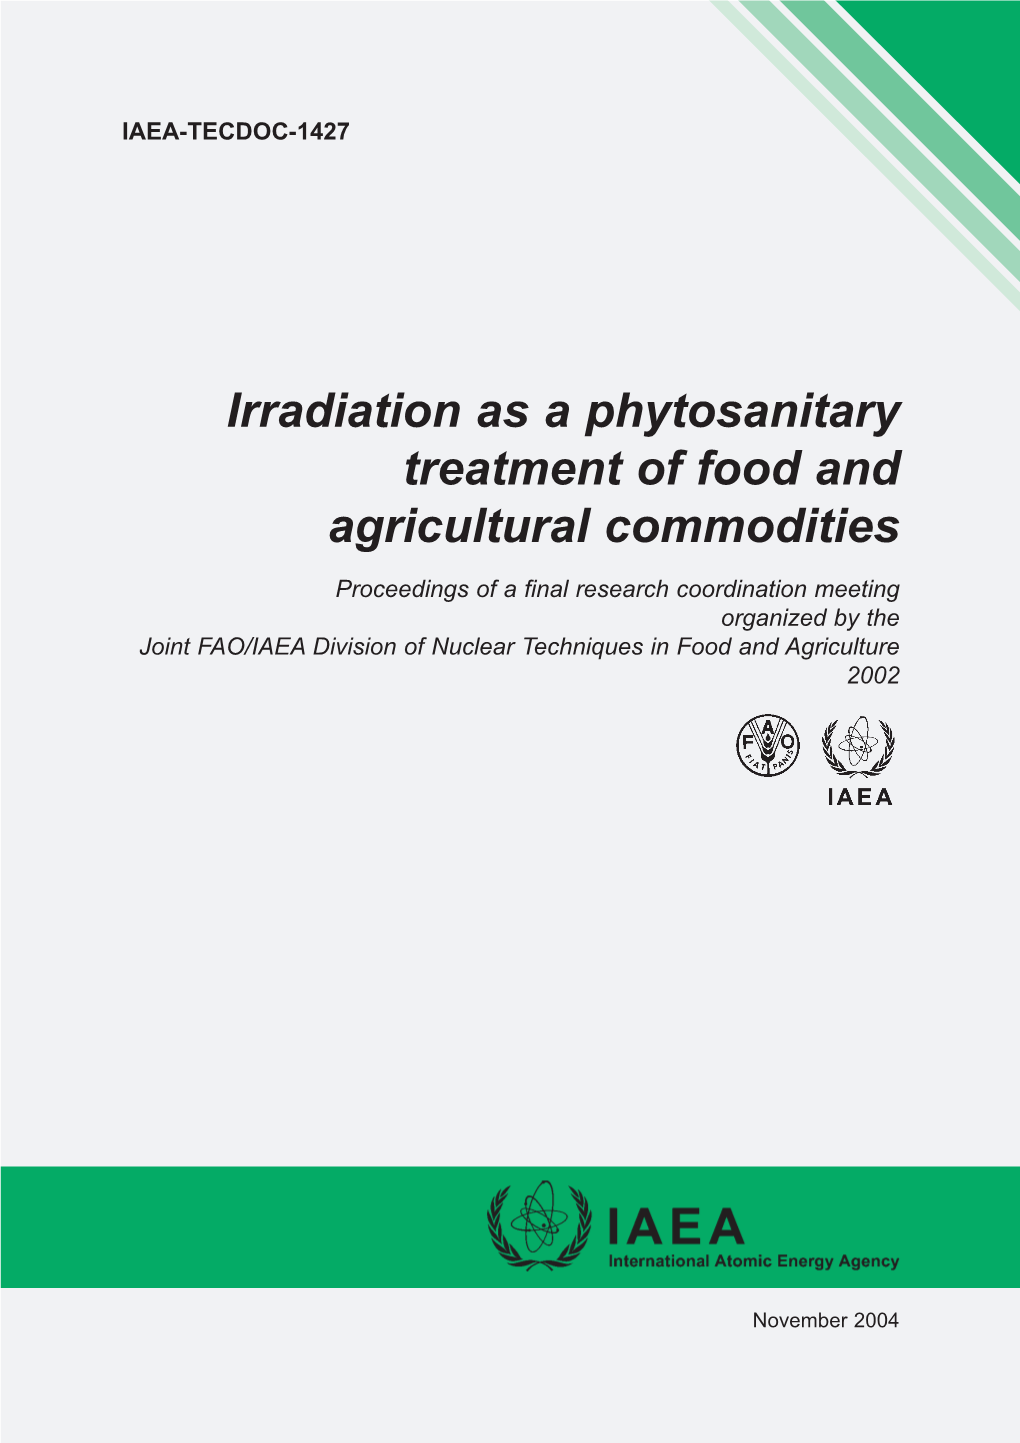 Irradiation As a Phytosanitary Treatment of Food and Agricultural Commodities